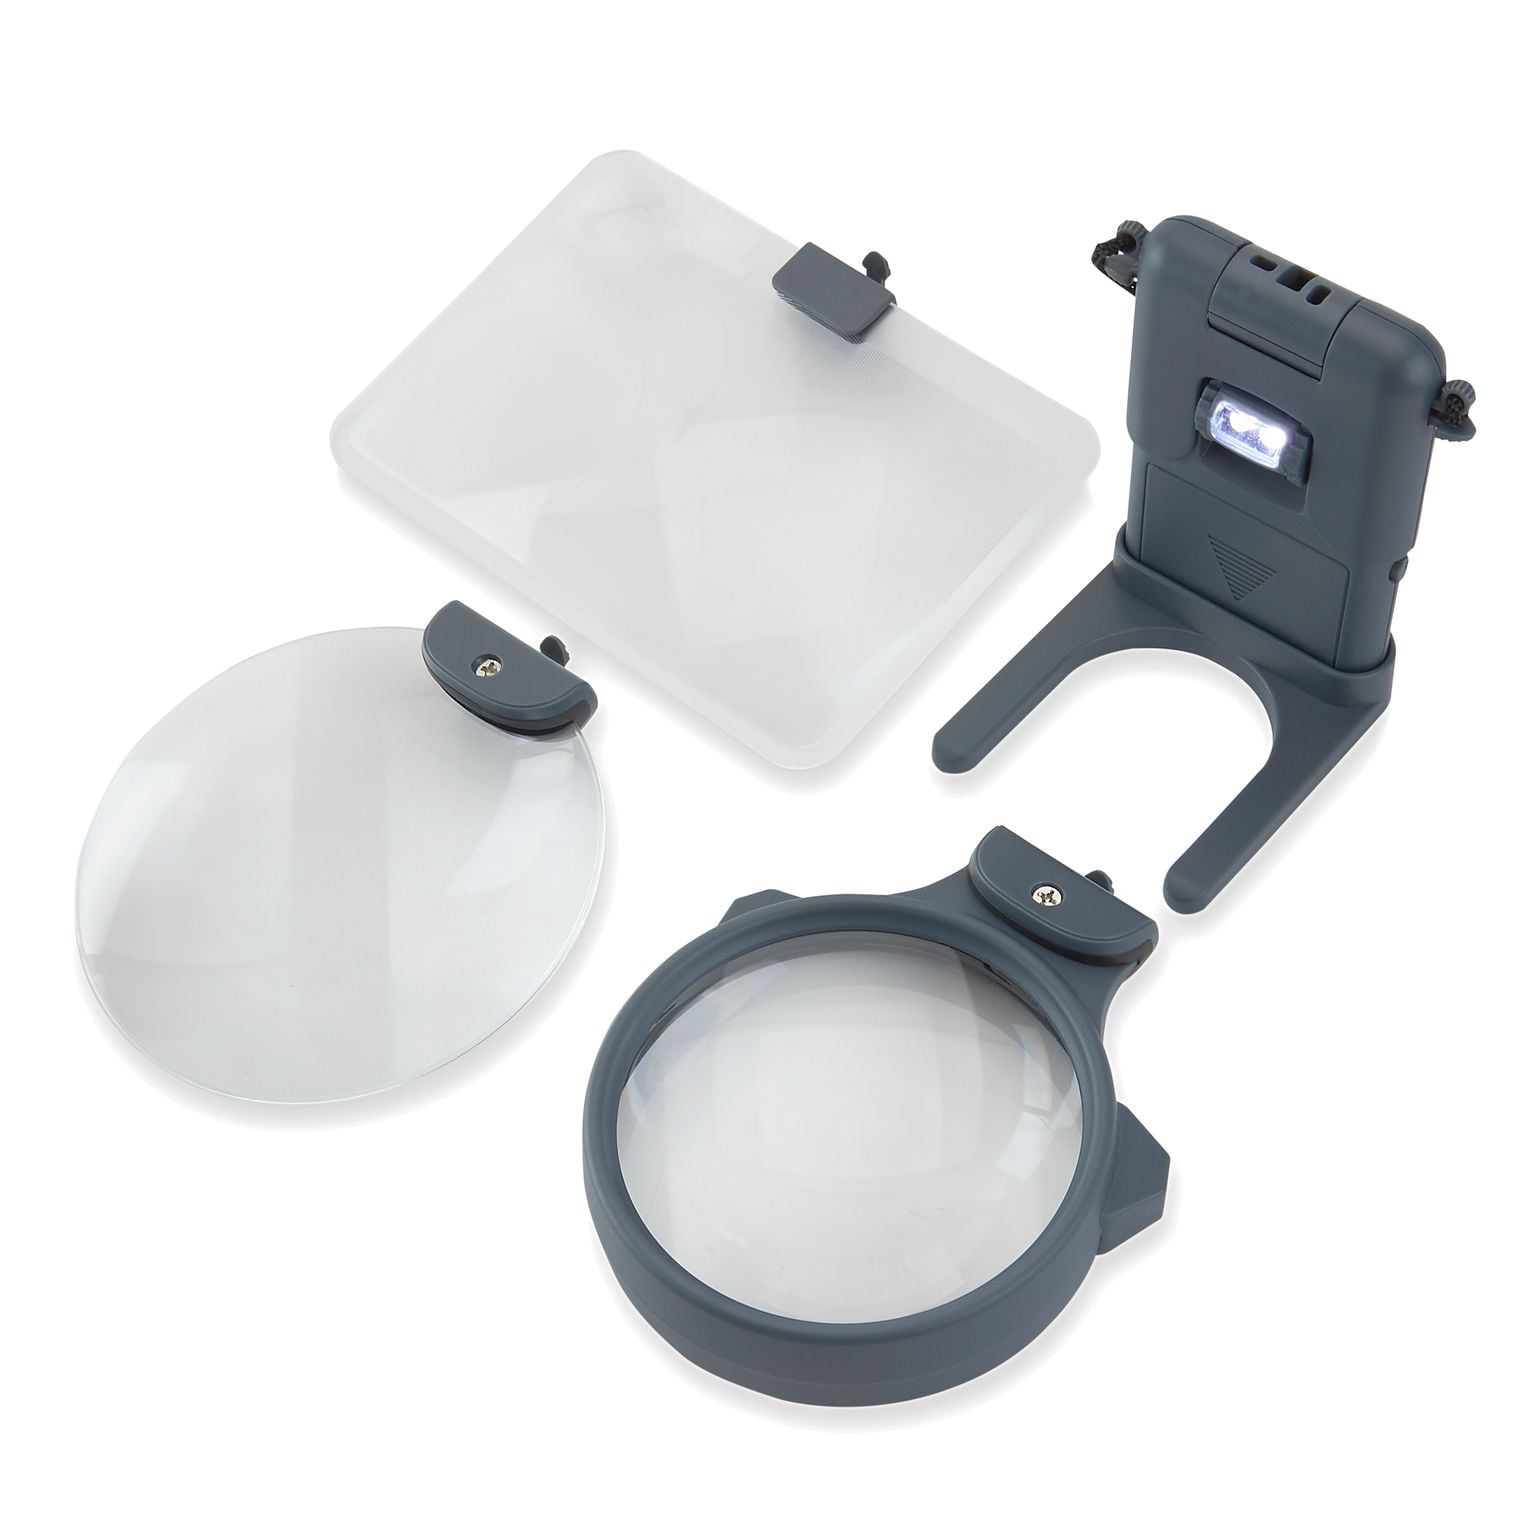 Carson MagniShine™ LED Lighted 2x Power Hands-Free Magnifier (HF-66)